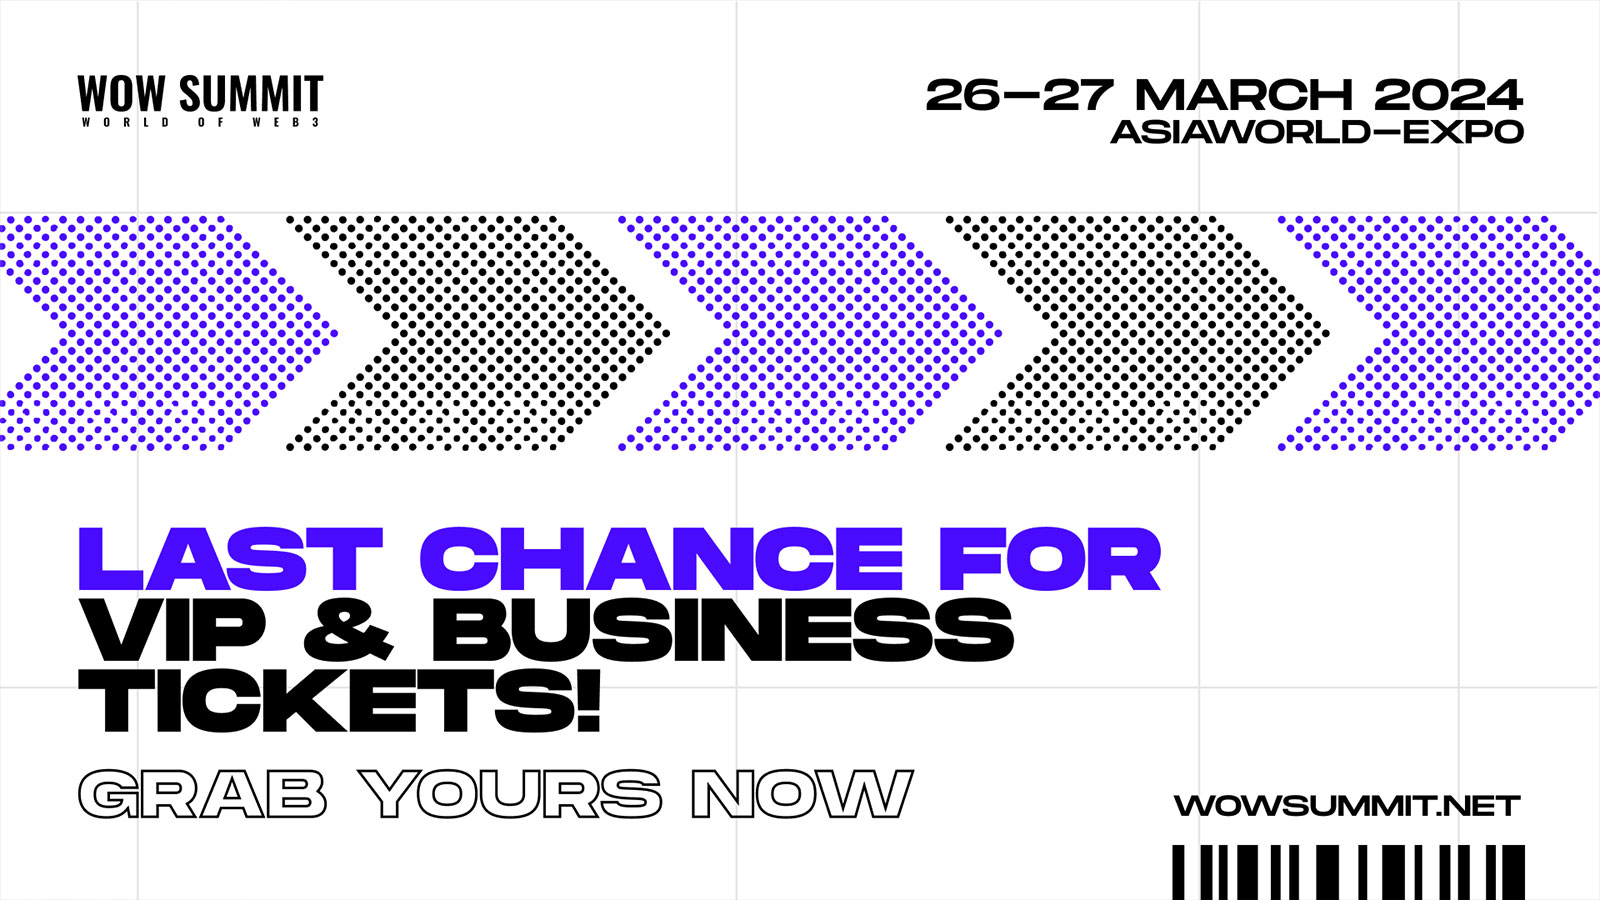 WOW Summit Hong Kong VIP and Business Networking Tickets Selling Fast!